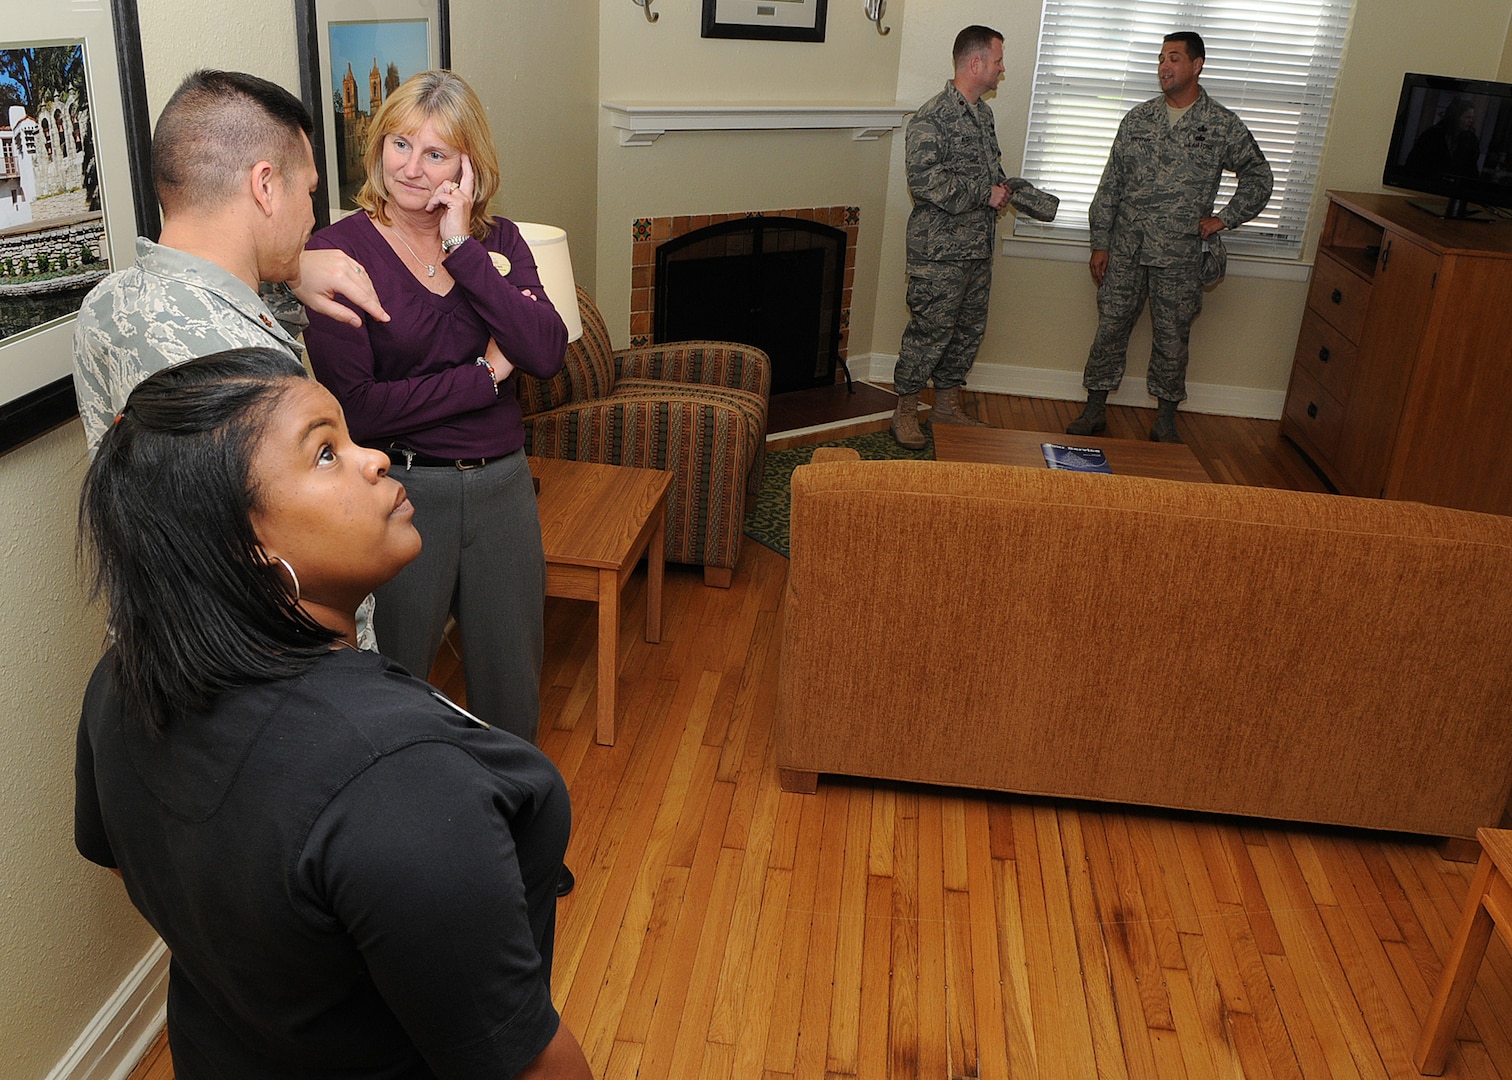 The living room of a recently renovated Temporary Lodging Facility is inpected by guests after a Nov. 3 ribbon cutting ceremony opening the facility at Randolph Air Force Base, Texas. (U.S. Air Force photo by David Terry)